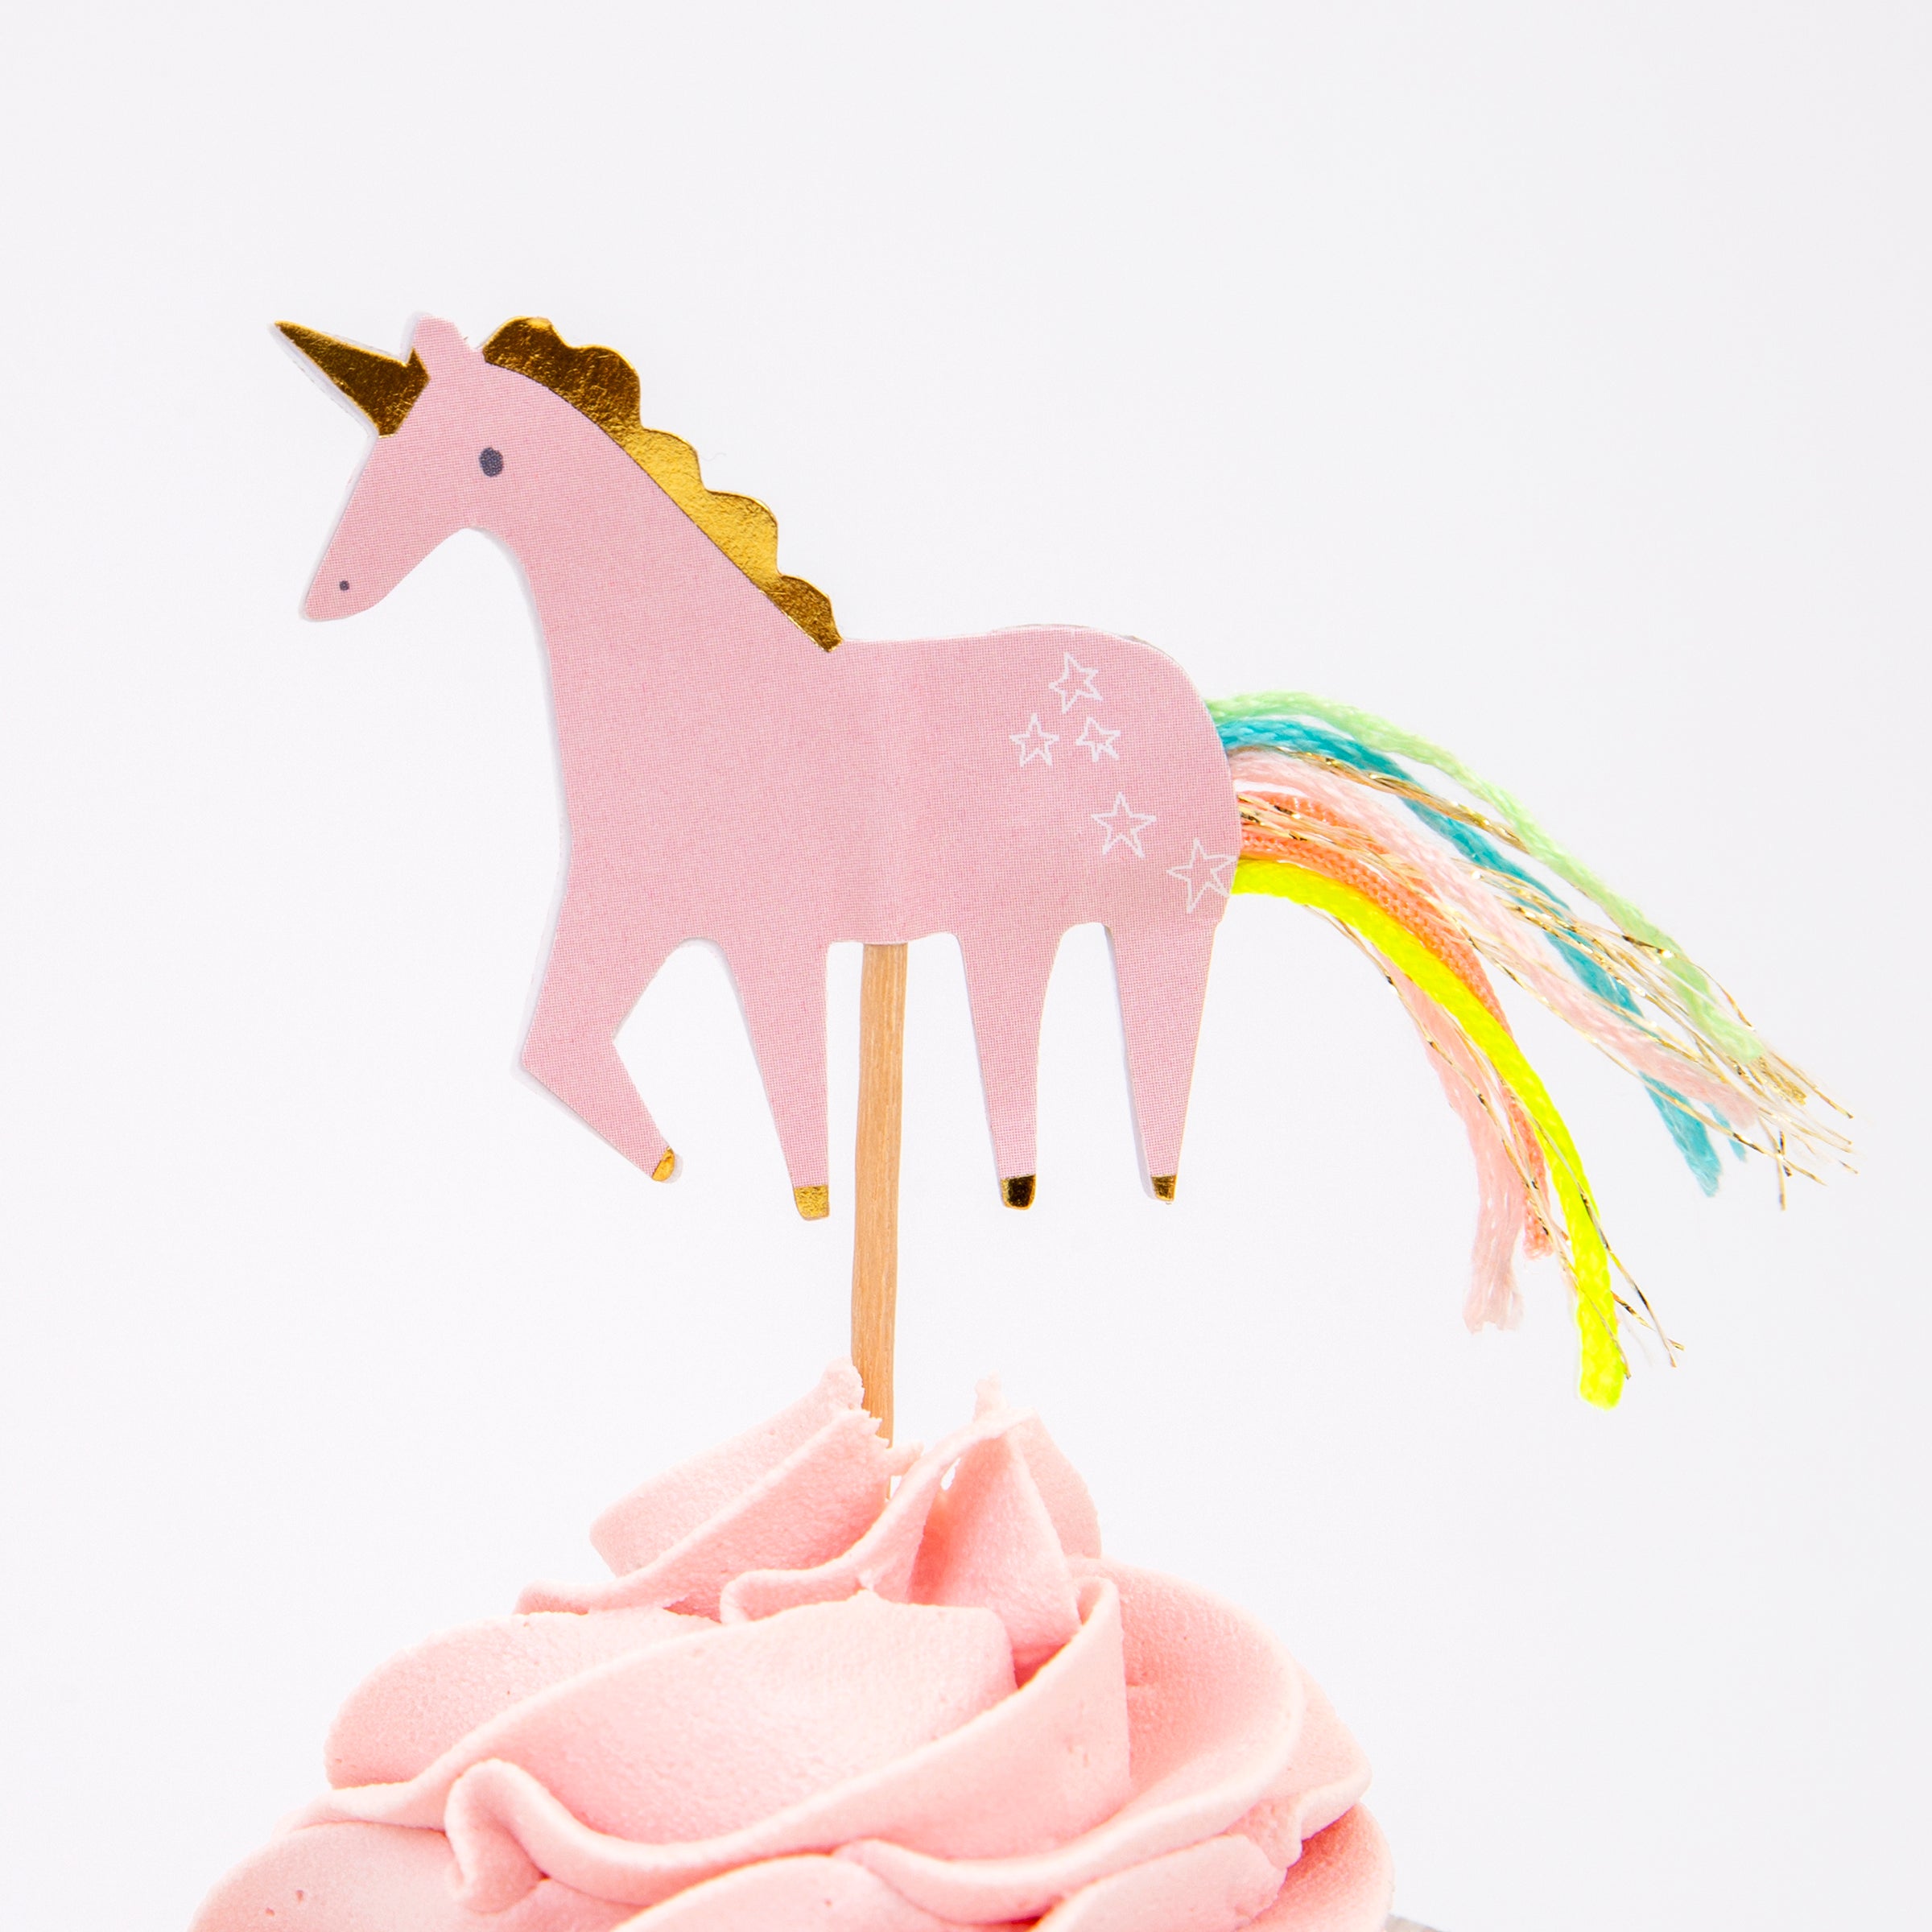 The kit includes shiny gold cupcake cases and rainbow and unicorn toppers, beautifully embellished with thread and gold foil.